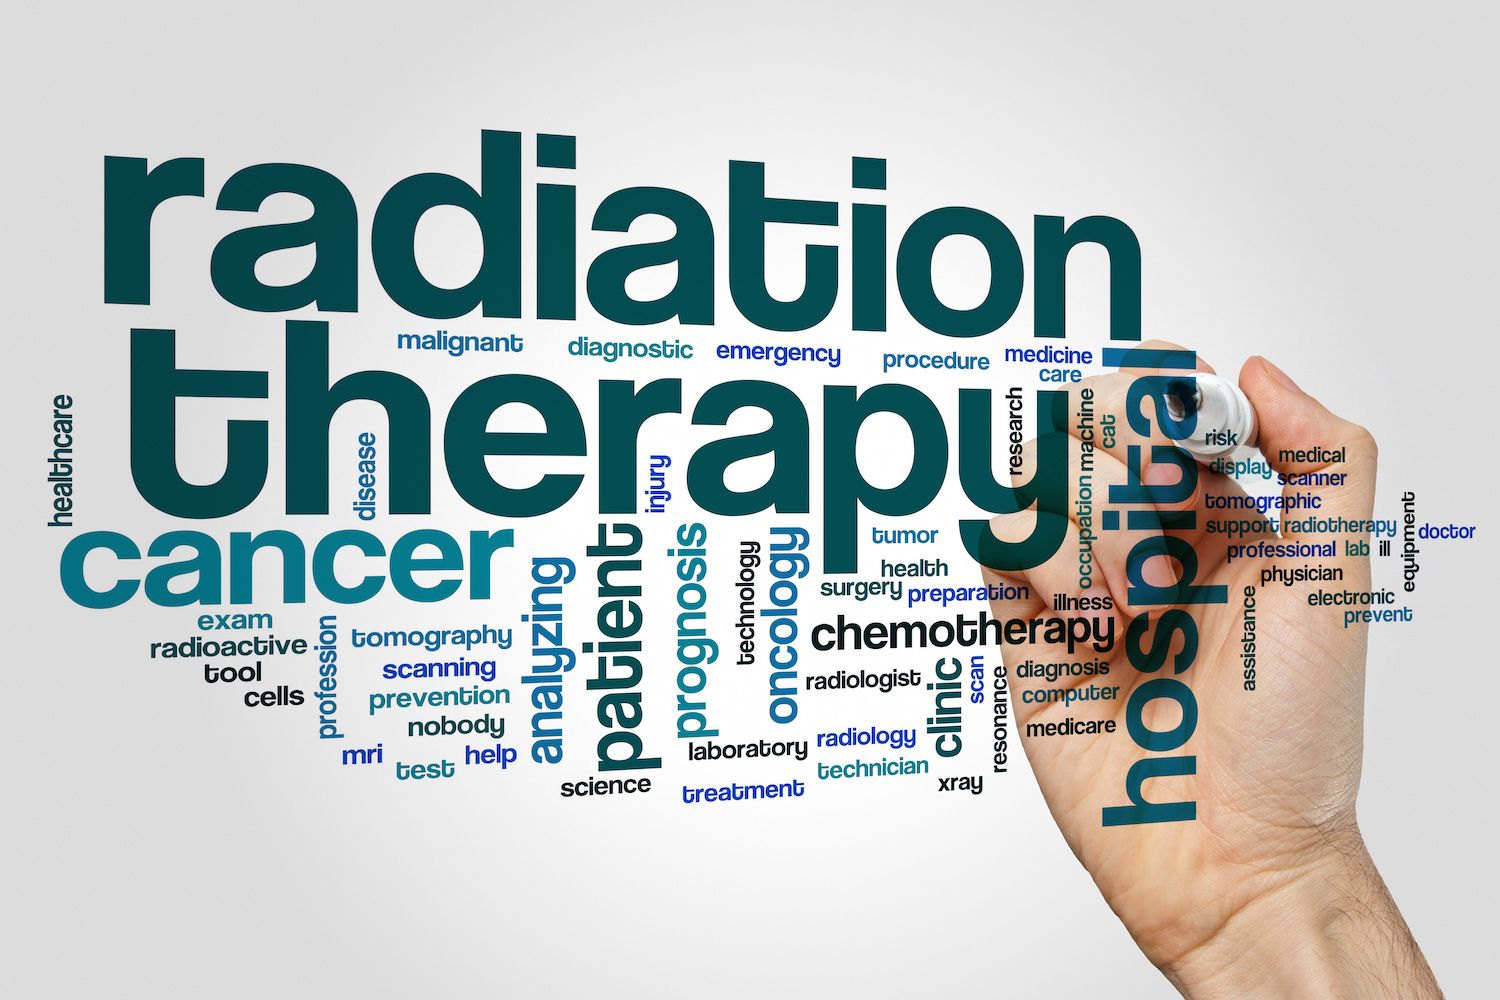 text cloud that features various words associated with radiation therapy